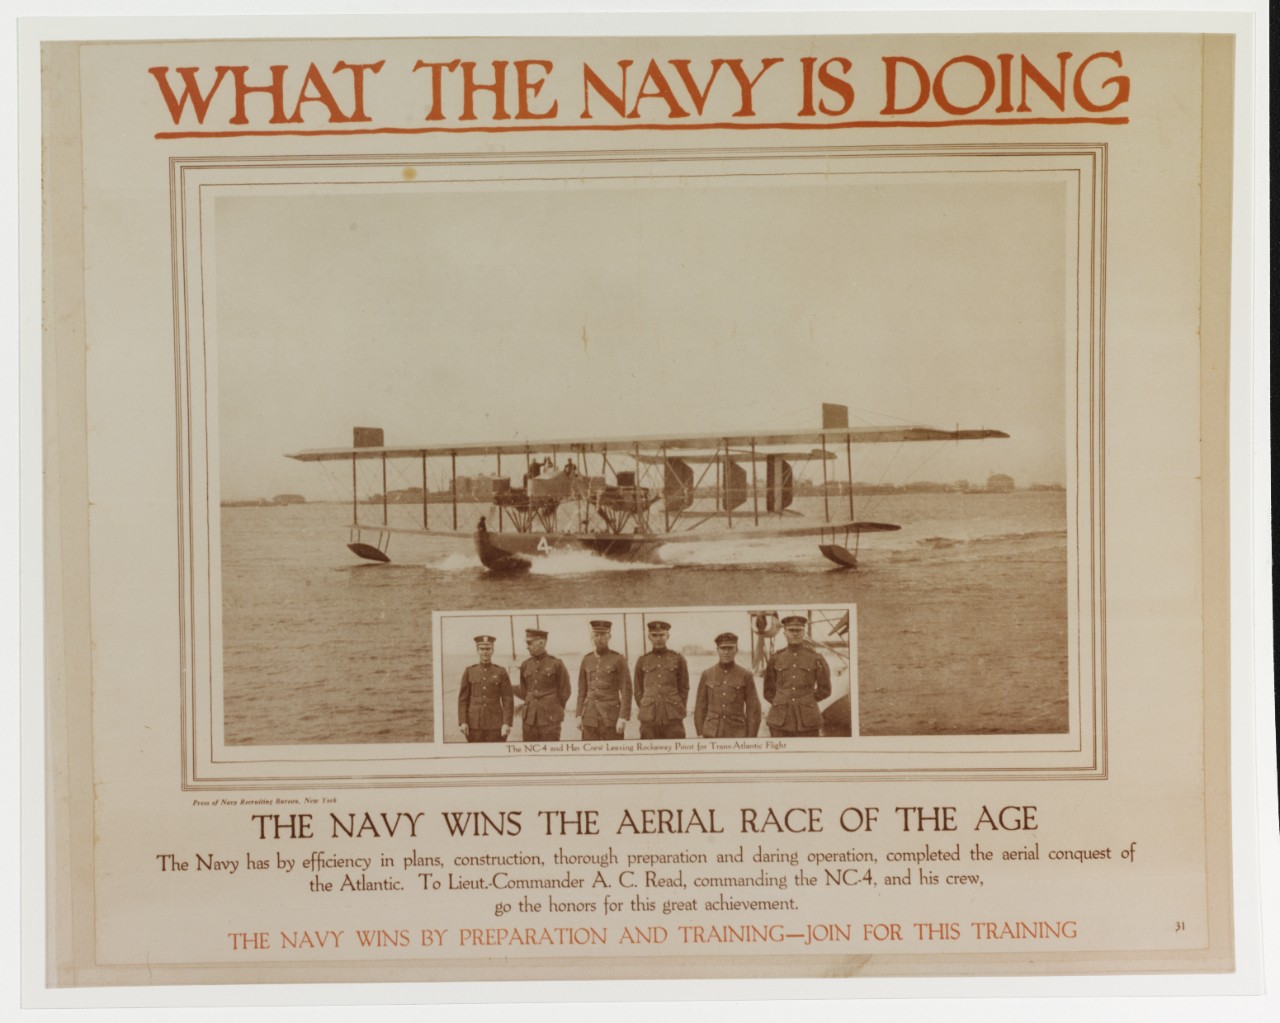 Recruiting Poster "What the Navy is Doing"